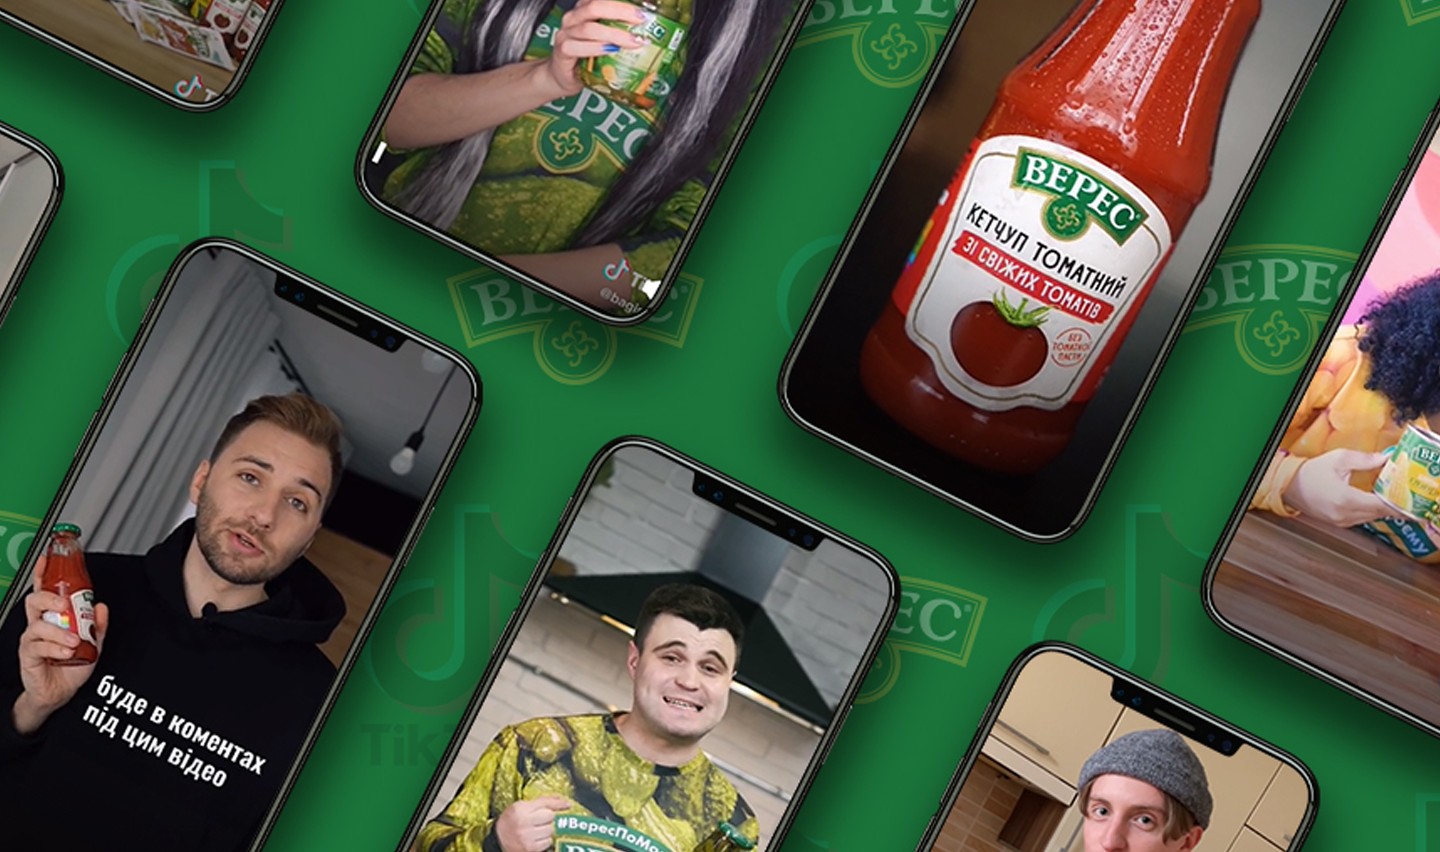 Crunchy-splashing-sipping-yummy TikTok campaign for  Veres brand image